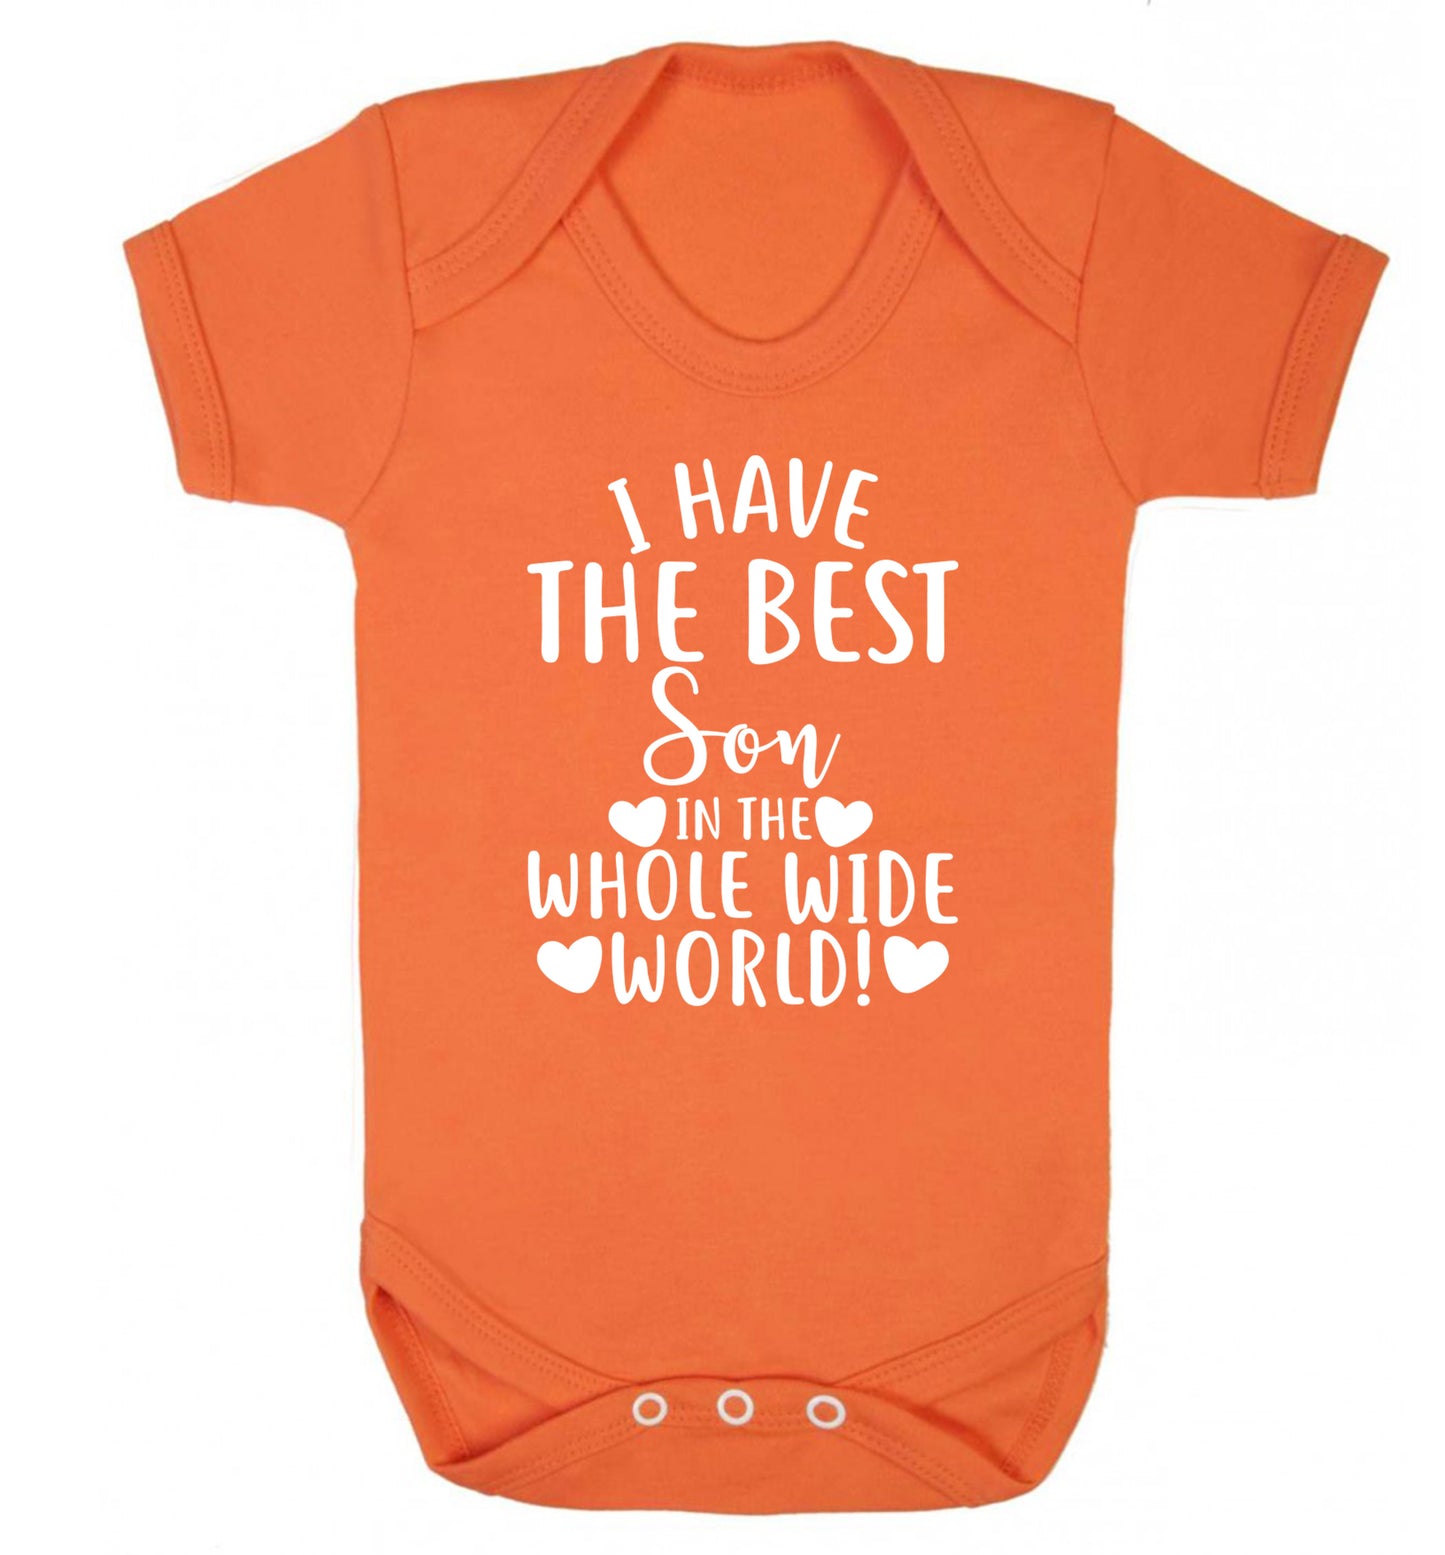 I have the best son in the whole wide world! Baby Vest orange 18-24 months